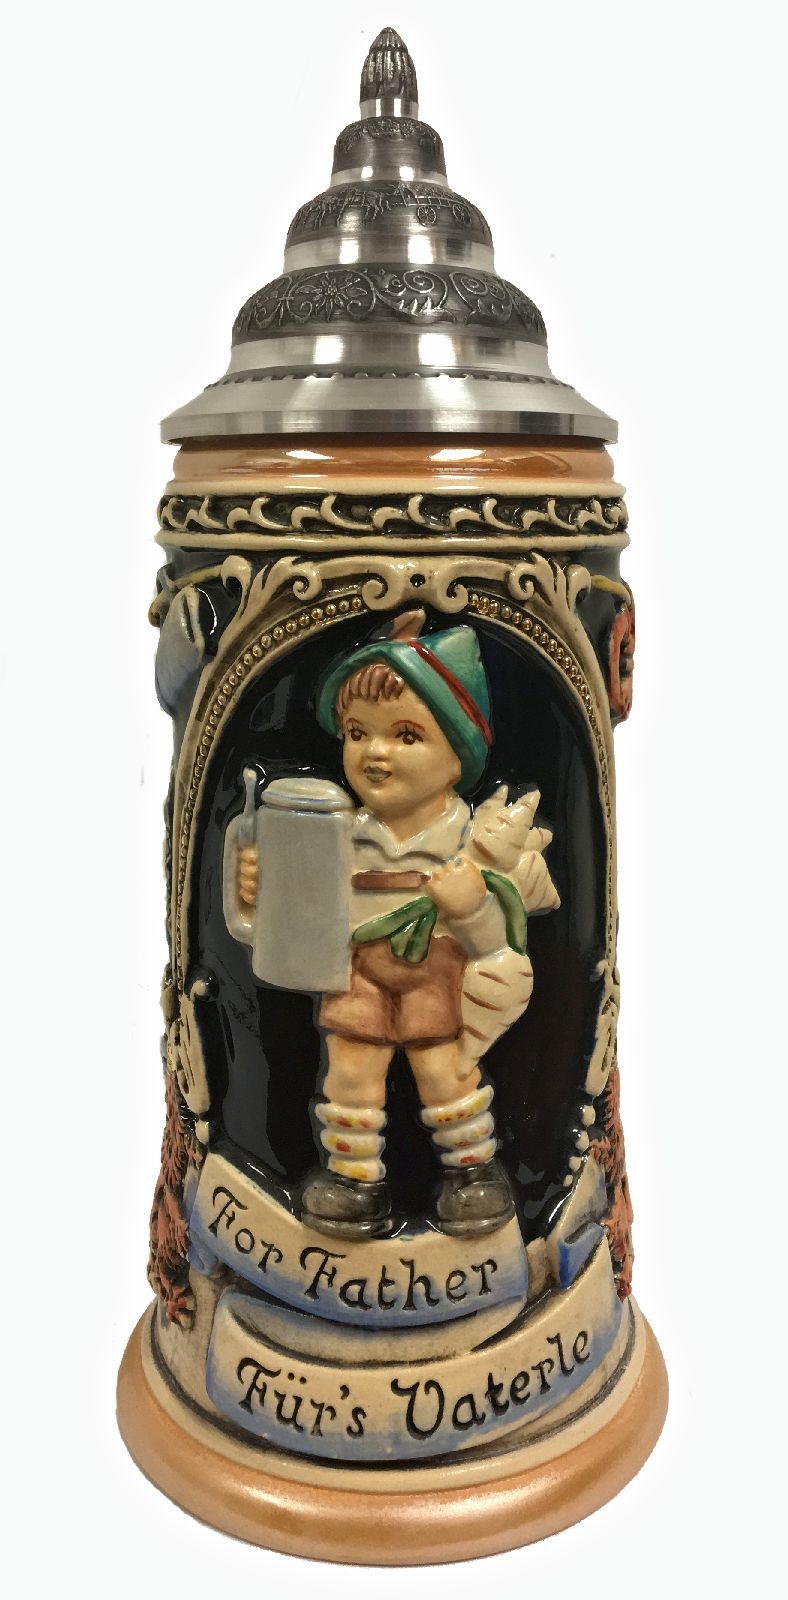 M.I. Hummel For Father LE Stoneware German Beer Stein .75 L Made in Germany